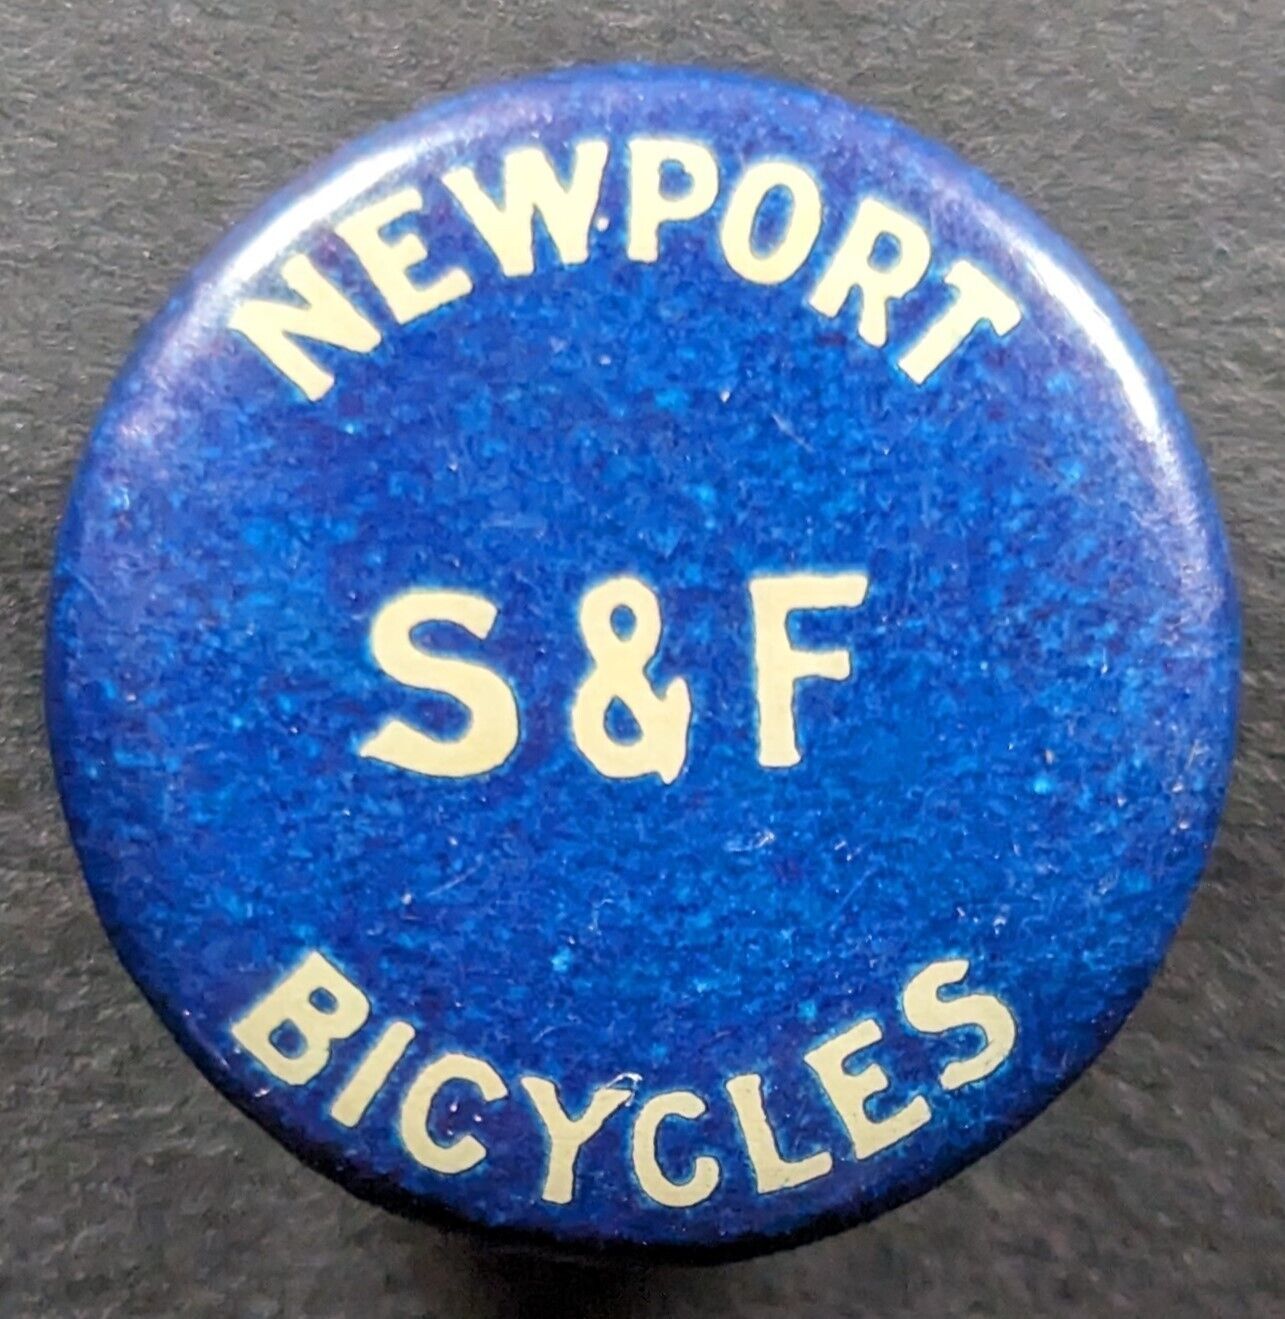 Antique 1890's-1910 S&F Newport Bicycle Stud Button Pin